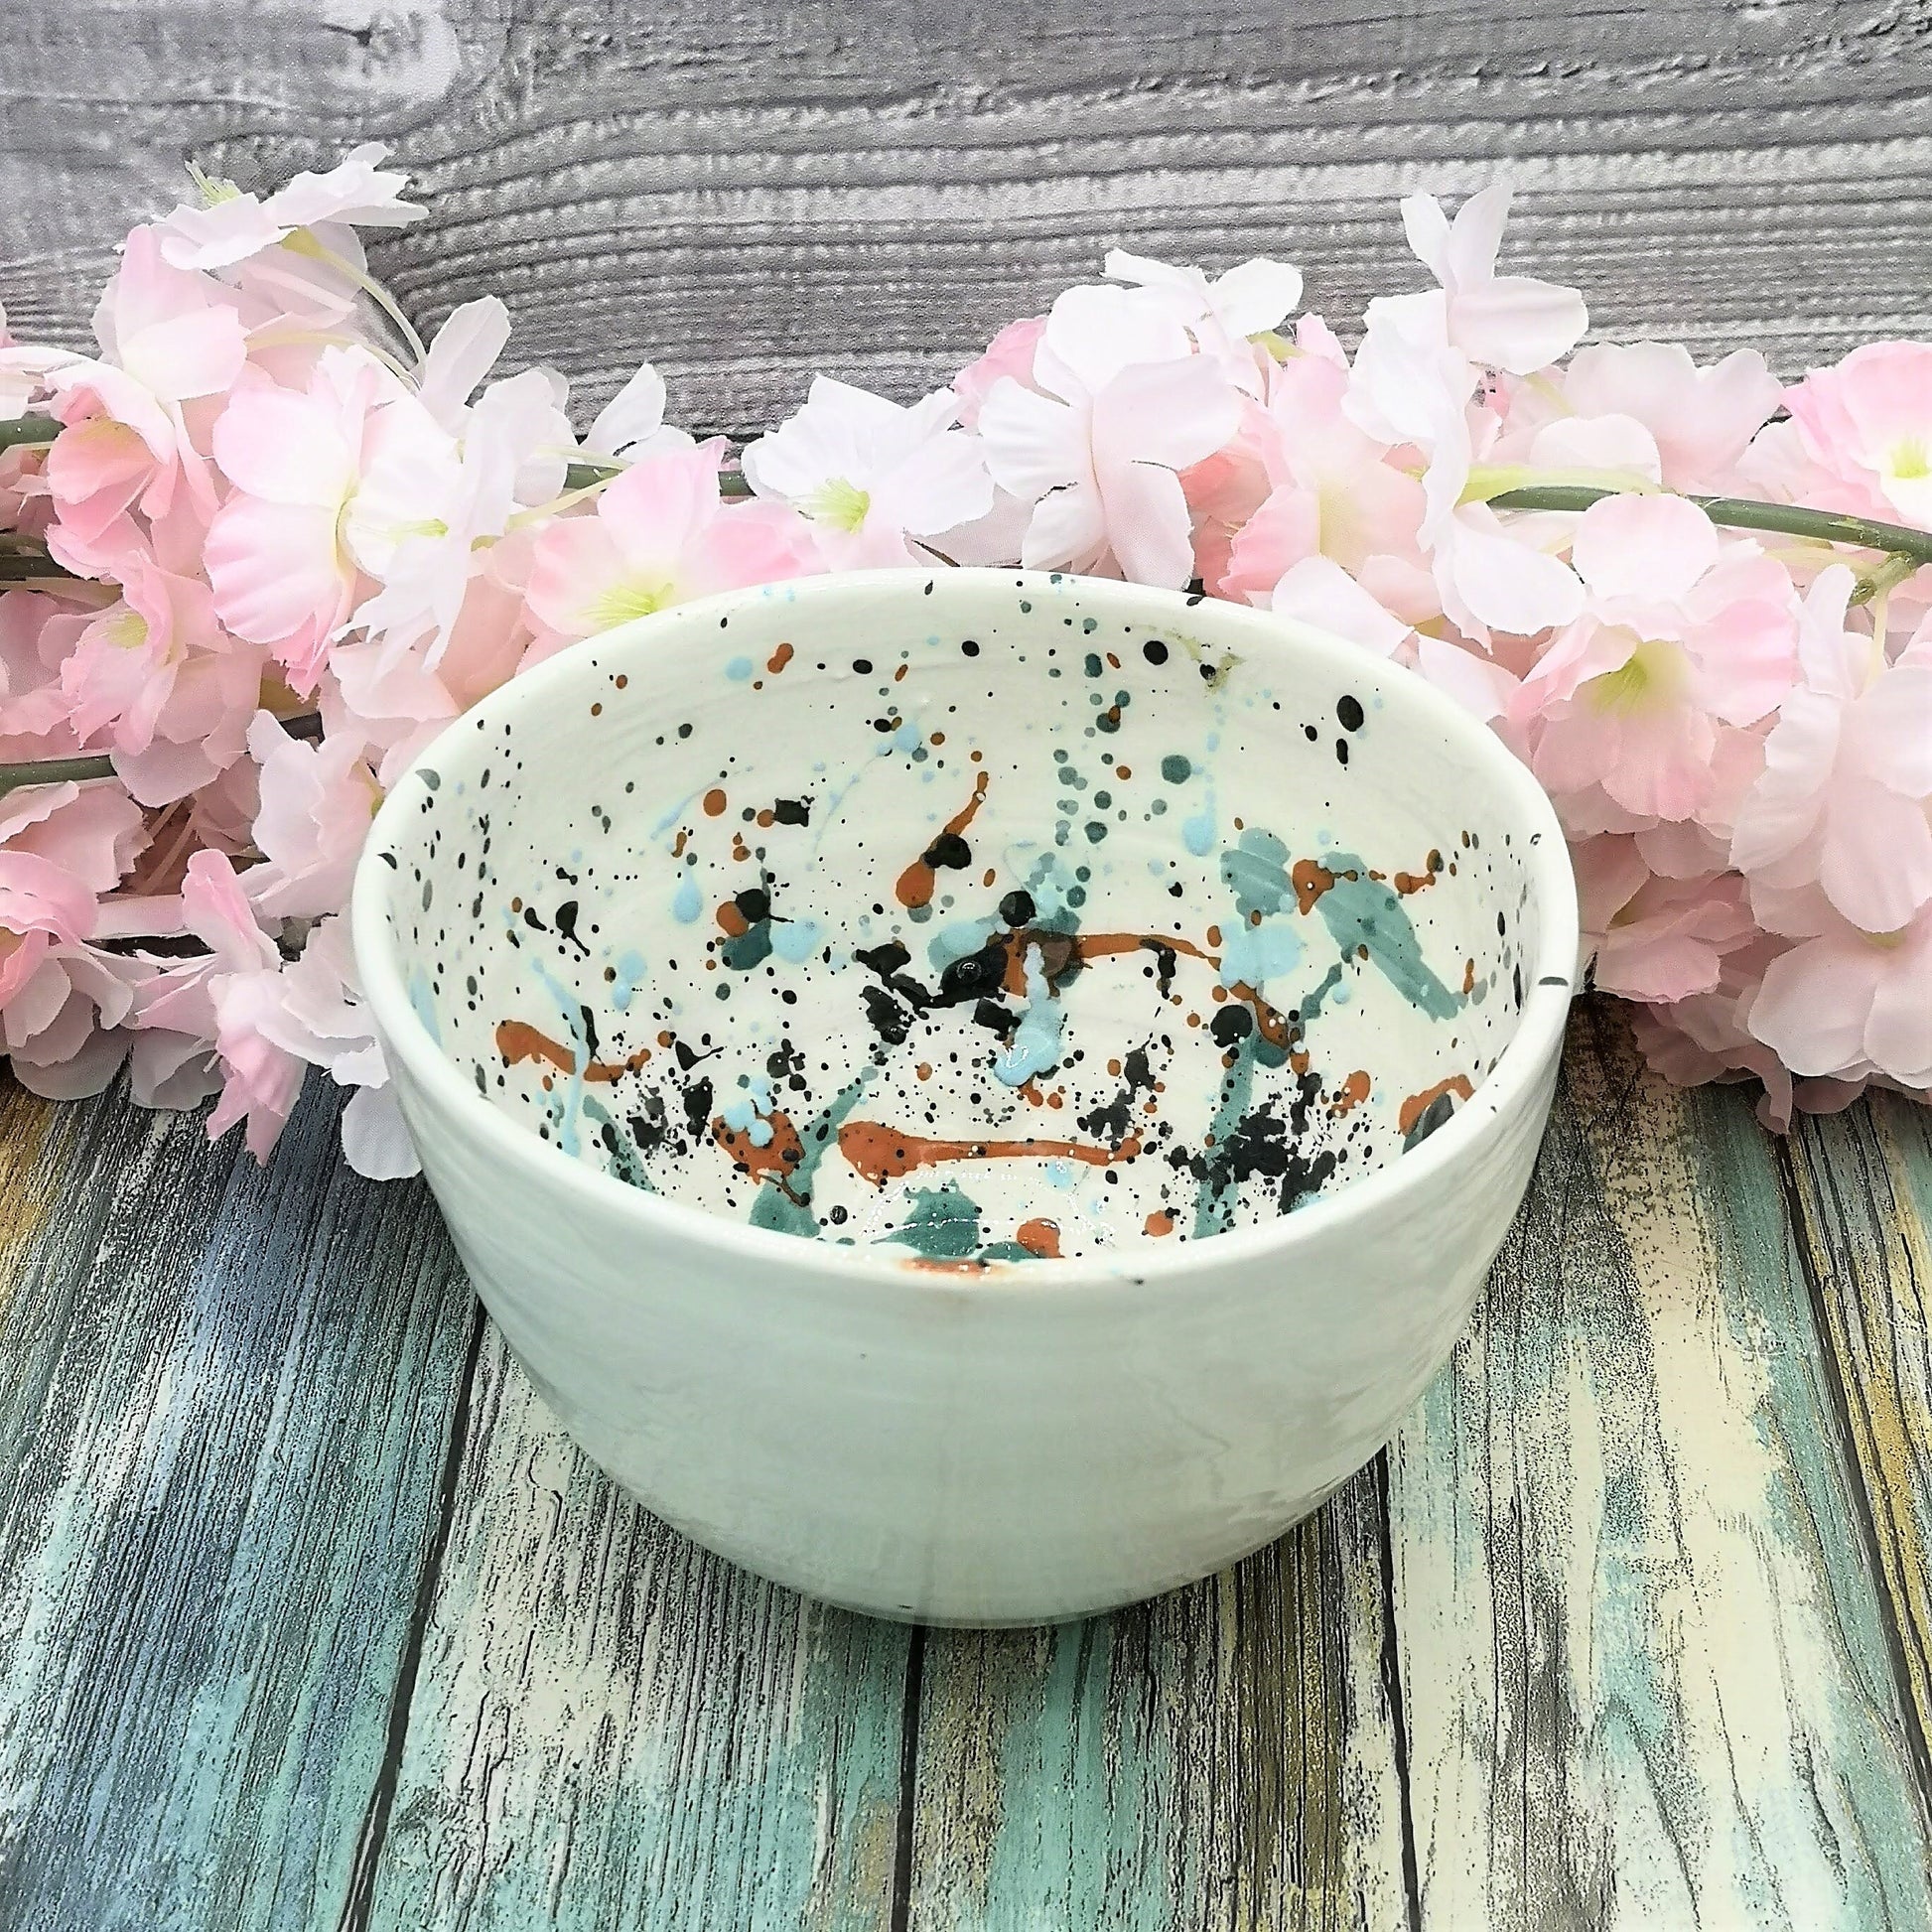 HANDMADE CERAMIC BOWLS For Mothers Day Gift, Decorative Bowl Housewarming Gift For Women Who Has Everything, Mom Birthday Gift Best Sellers - Ceramica Ana Rafael